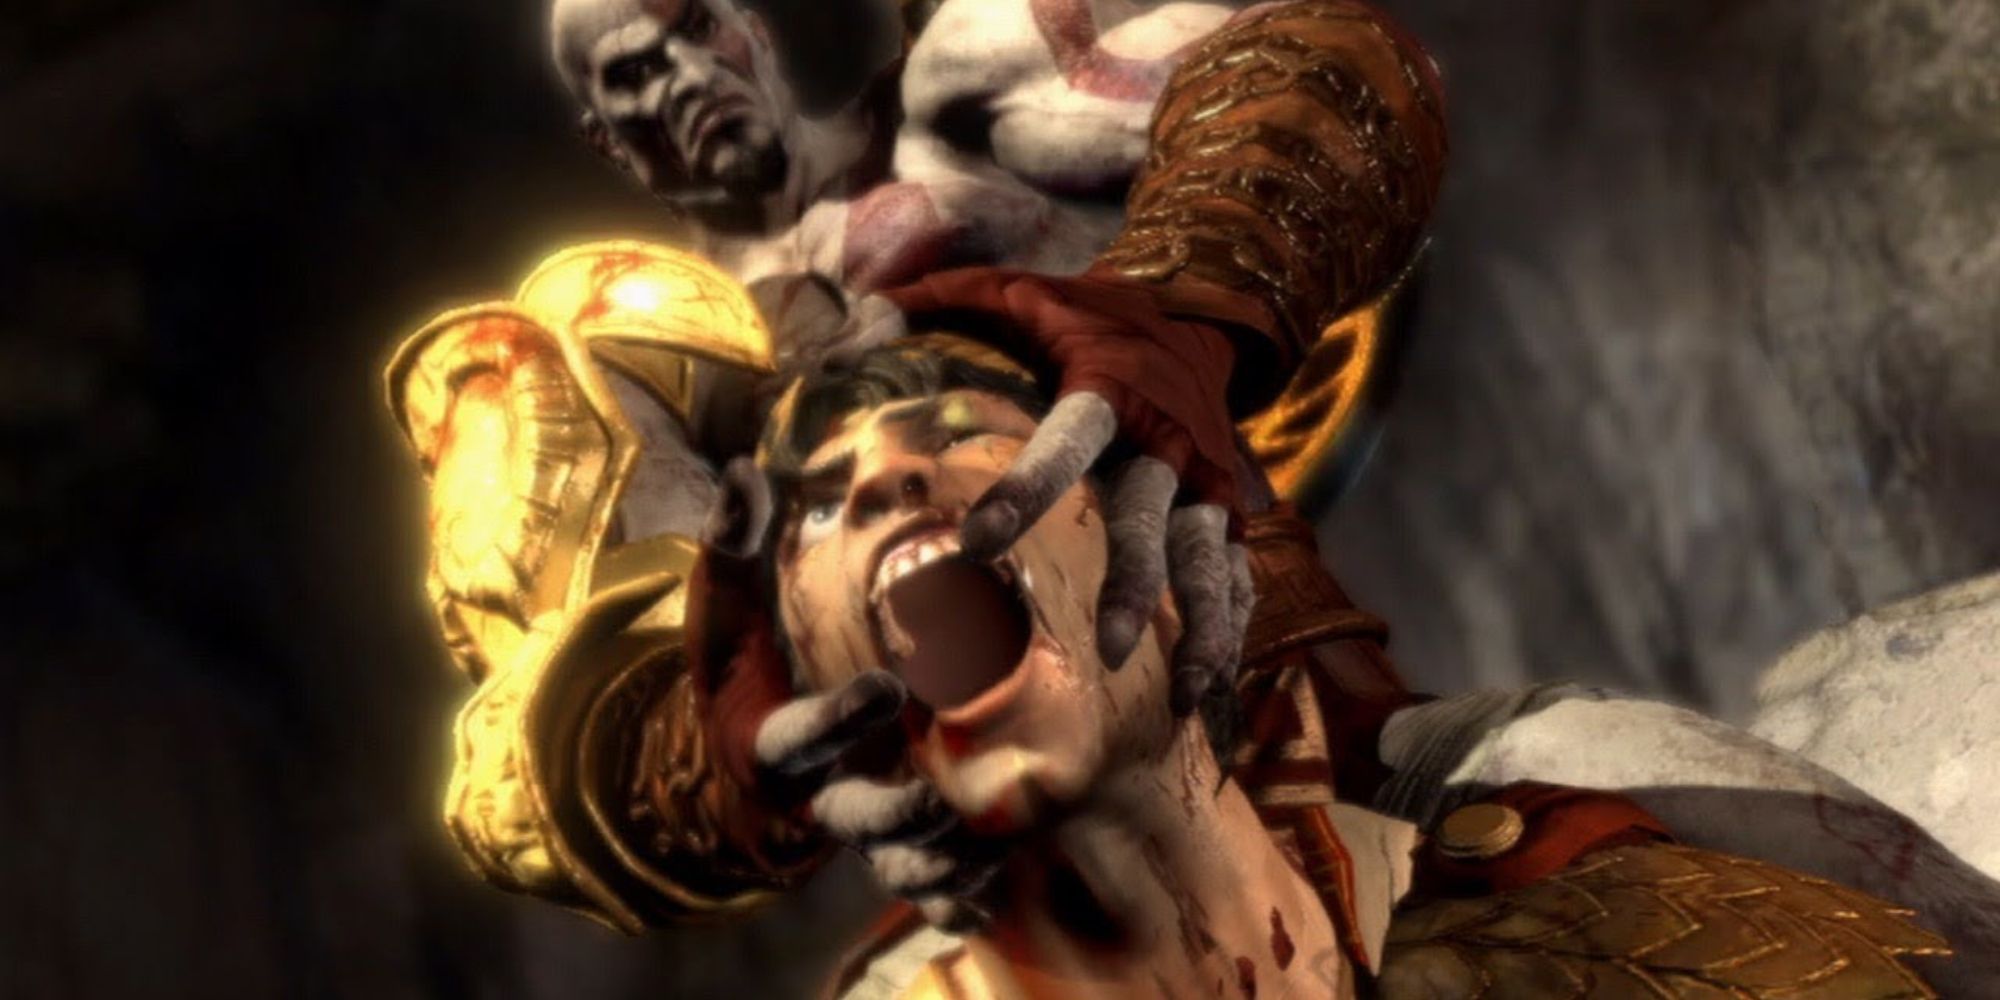 Helios and Kratos in God of War 3